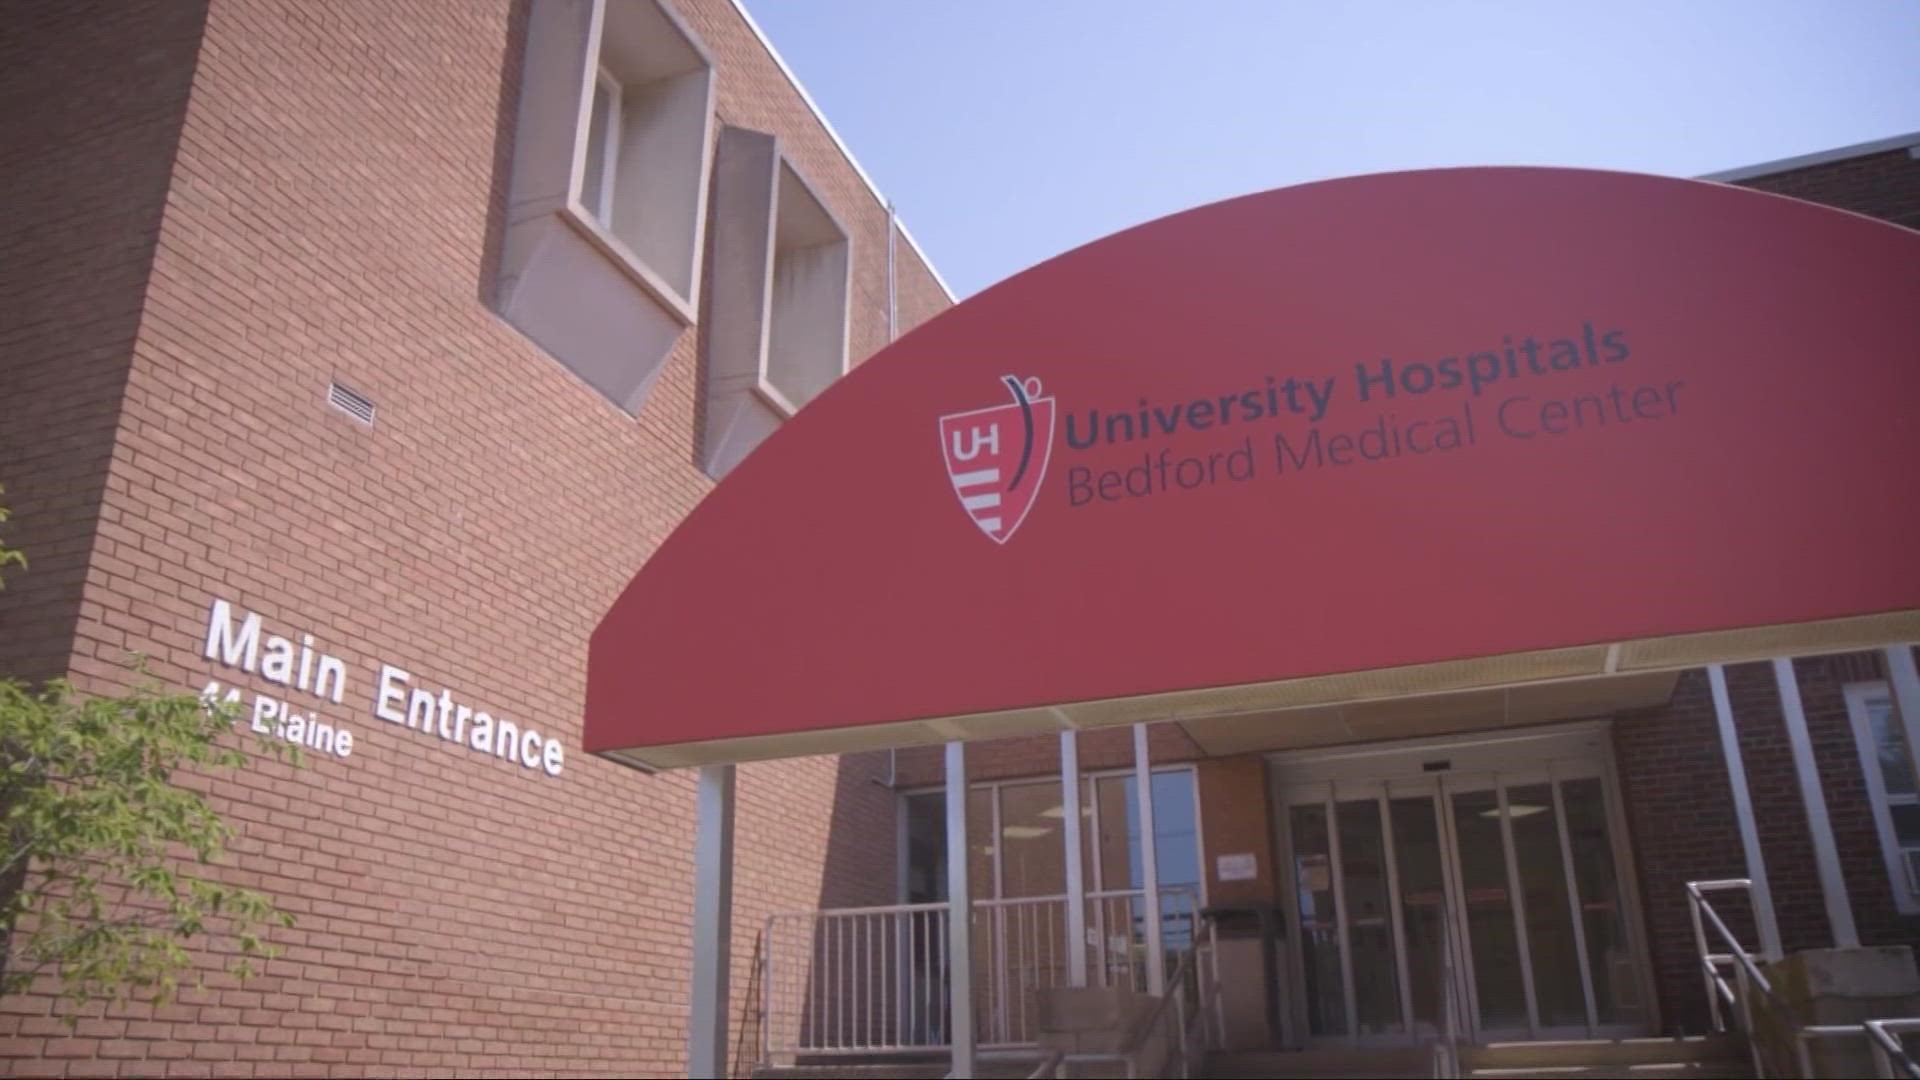 On Friday, University Hospitals is scheduled to close the inpatient and emergency departments at both UH Richmond and Bedford Medical Centers.